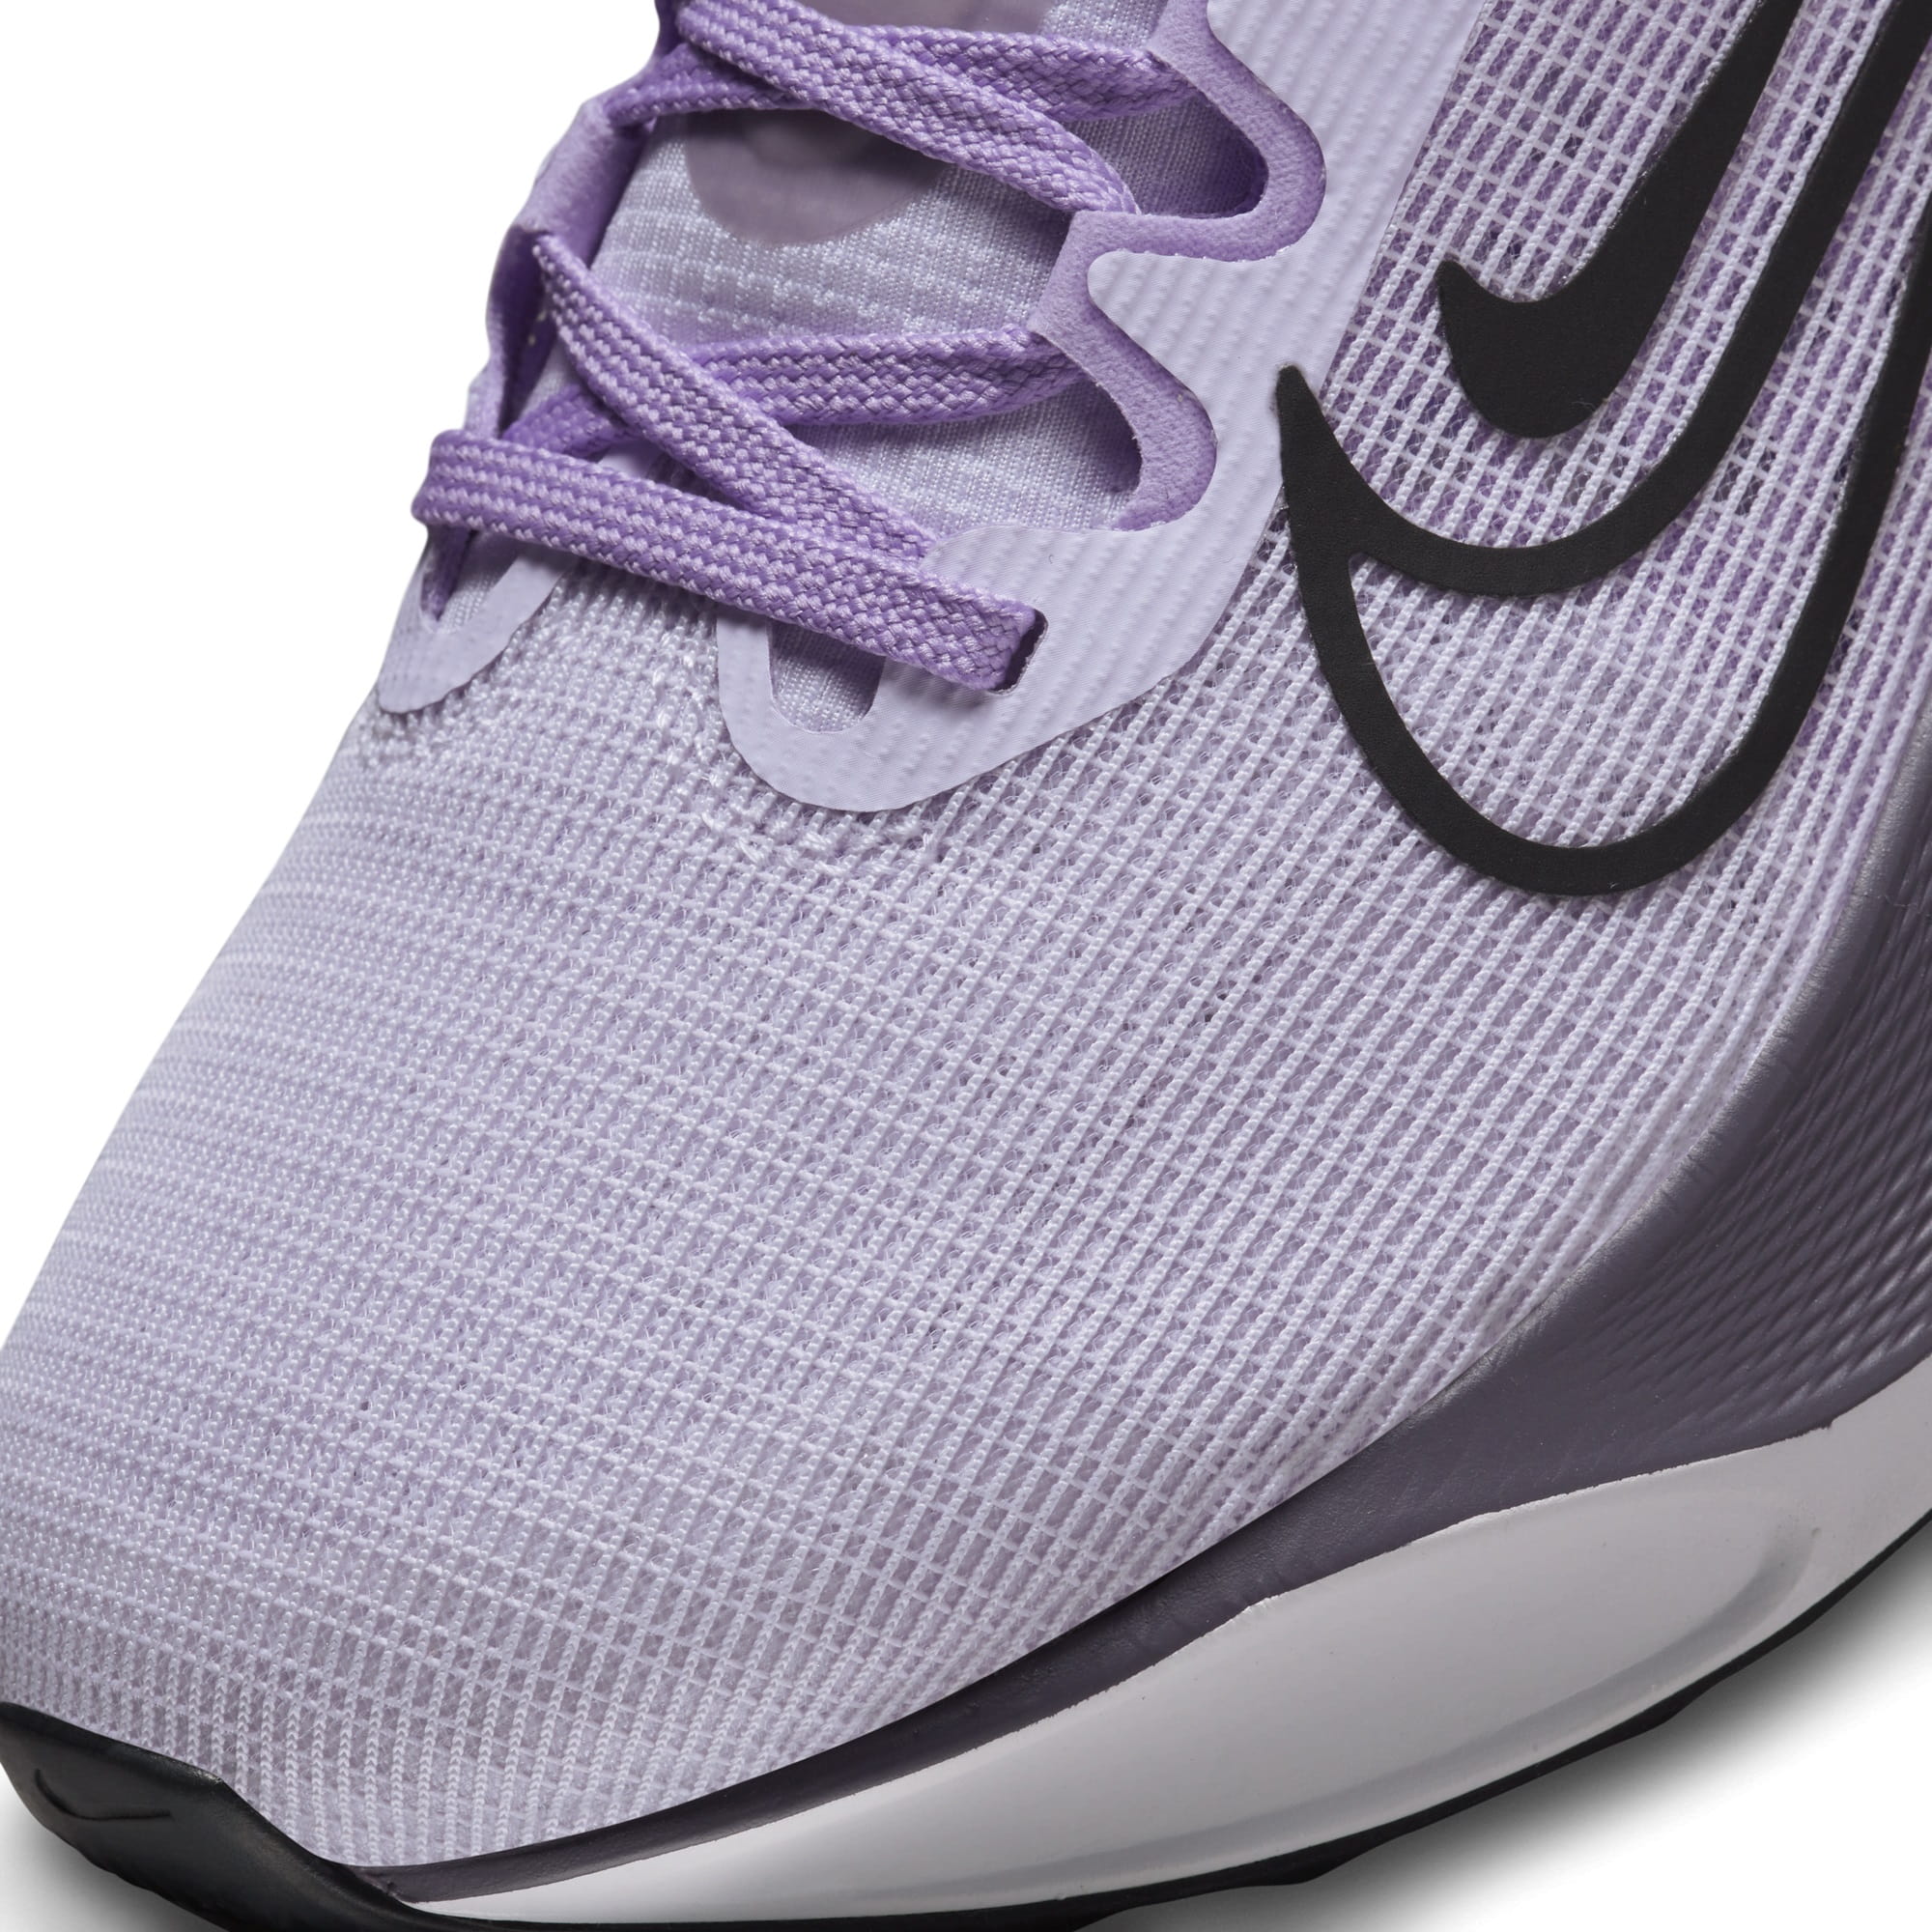 GIÀY THỂ THAO NIKE NỮ ZOOM FLY 5 WOMEN ROAD RUNNING SHOES BARELY GRAPE DM8974-500 9